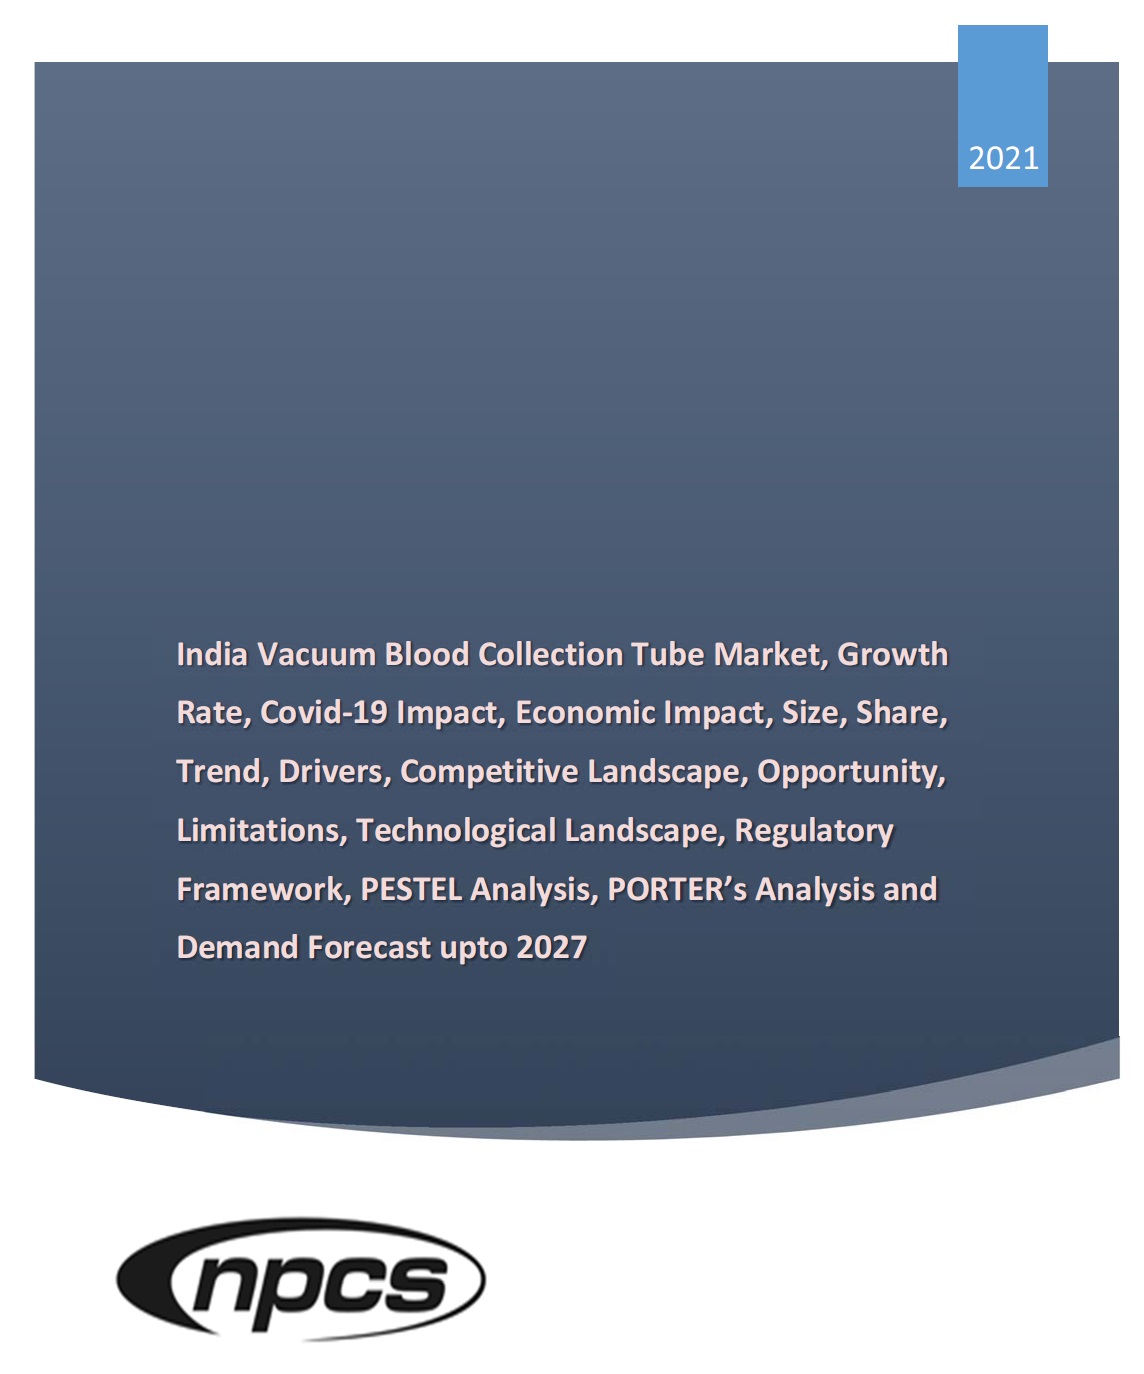 India Vacuum Blood Collection Tube Market